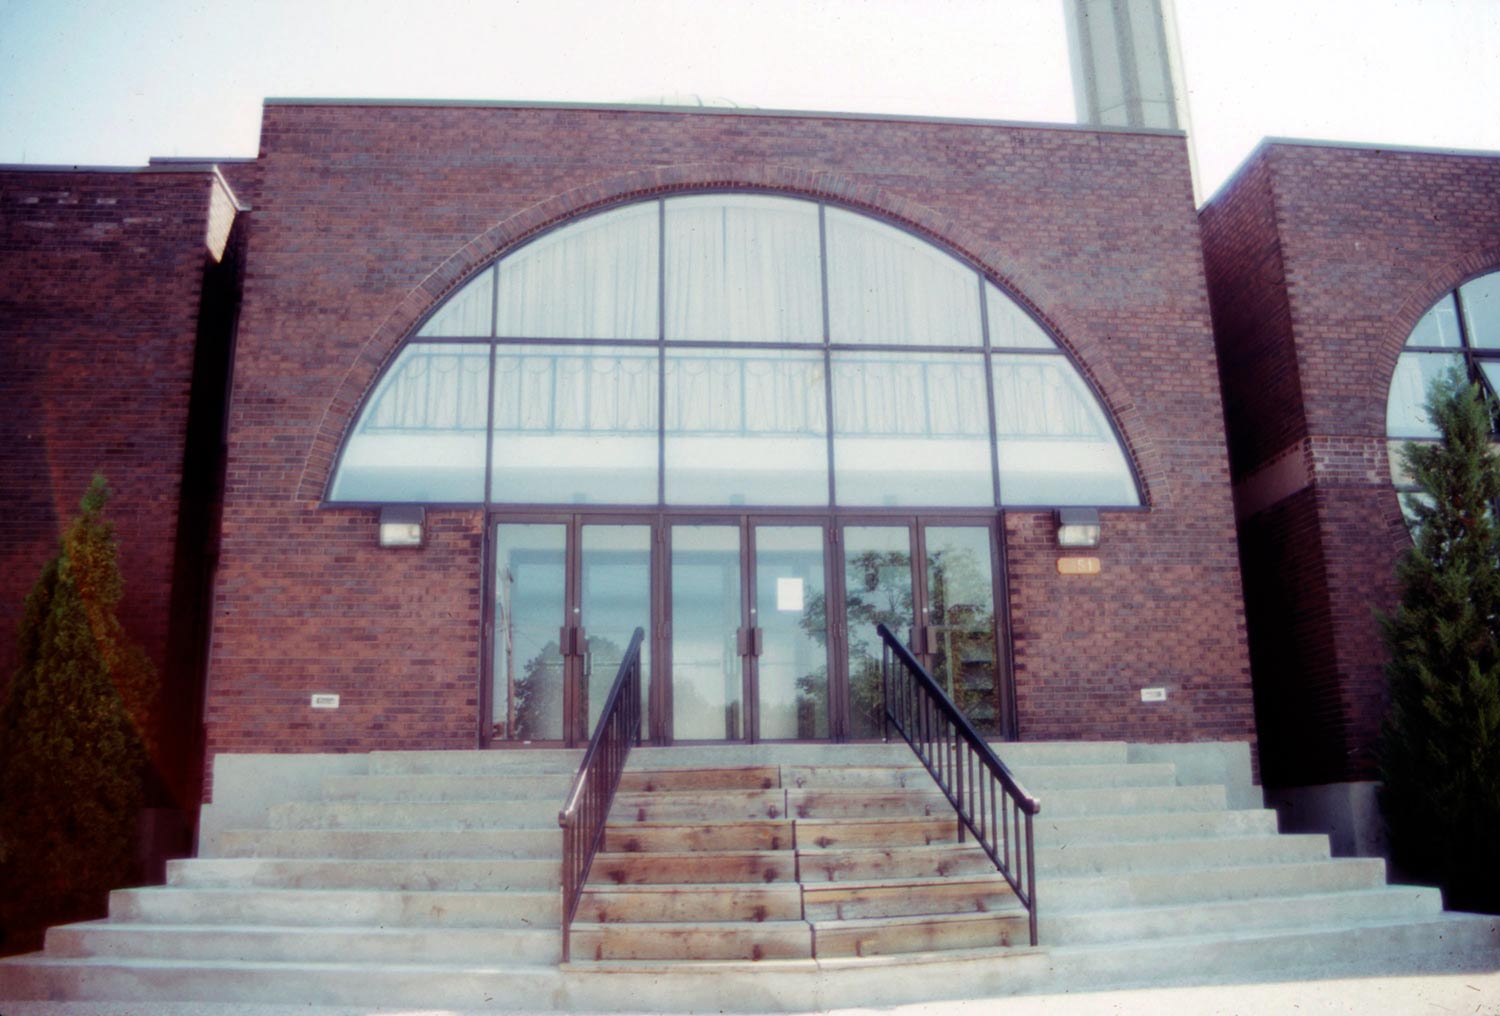 Ottawa Mosque - Main entrance on the west side of the mosque